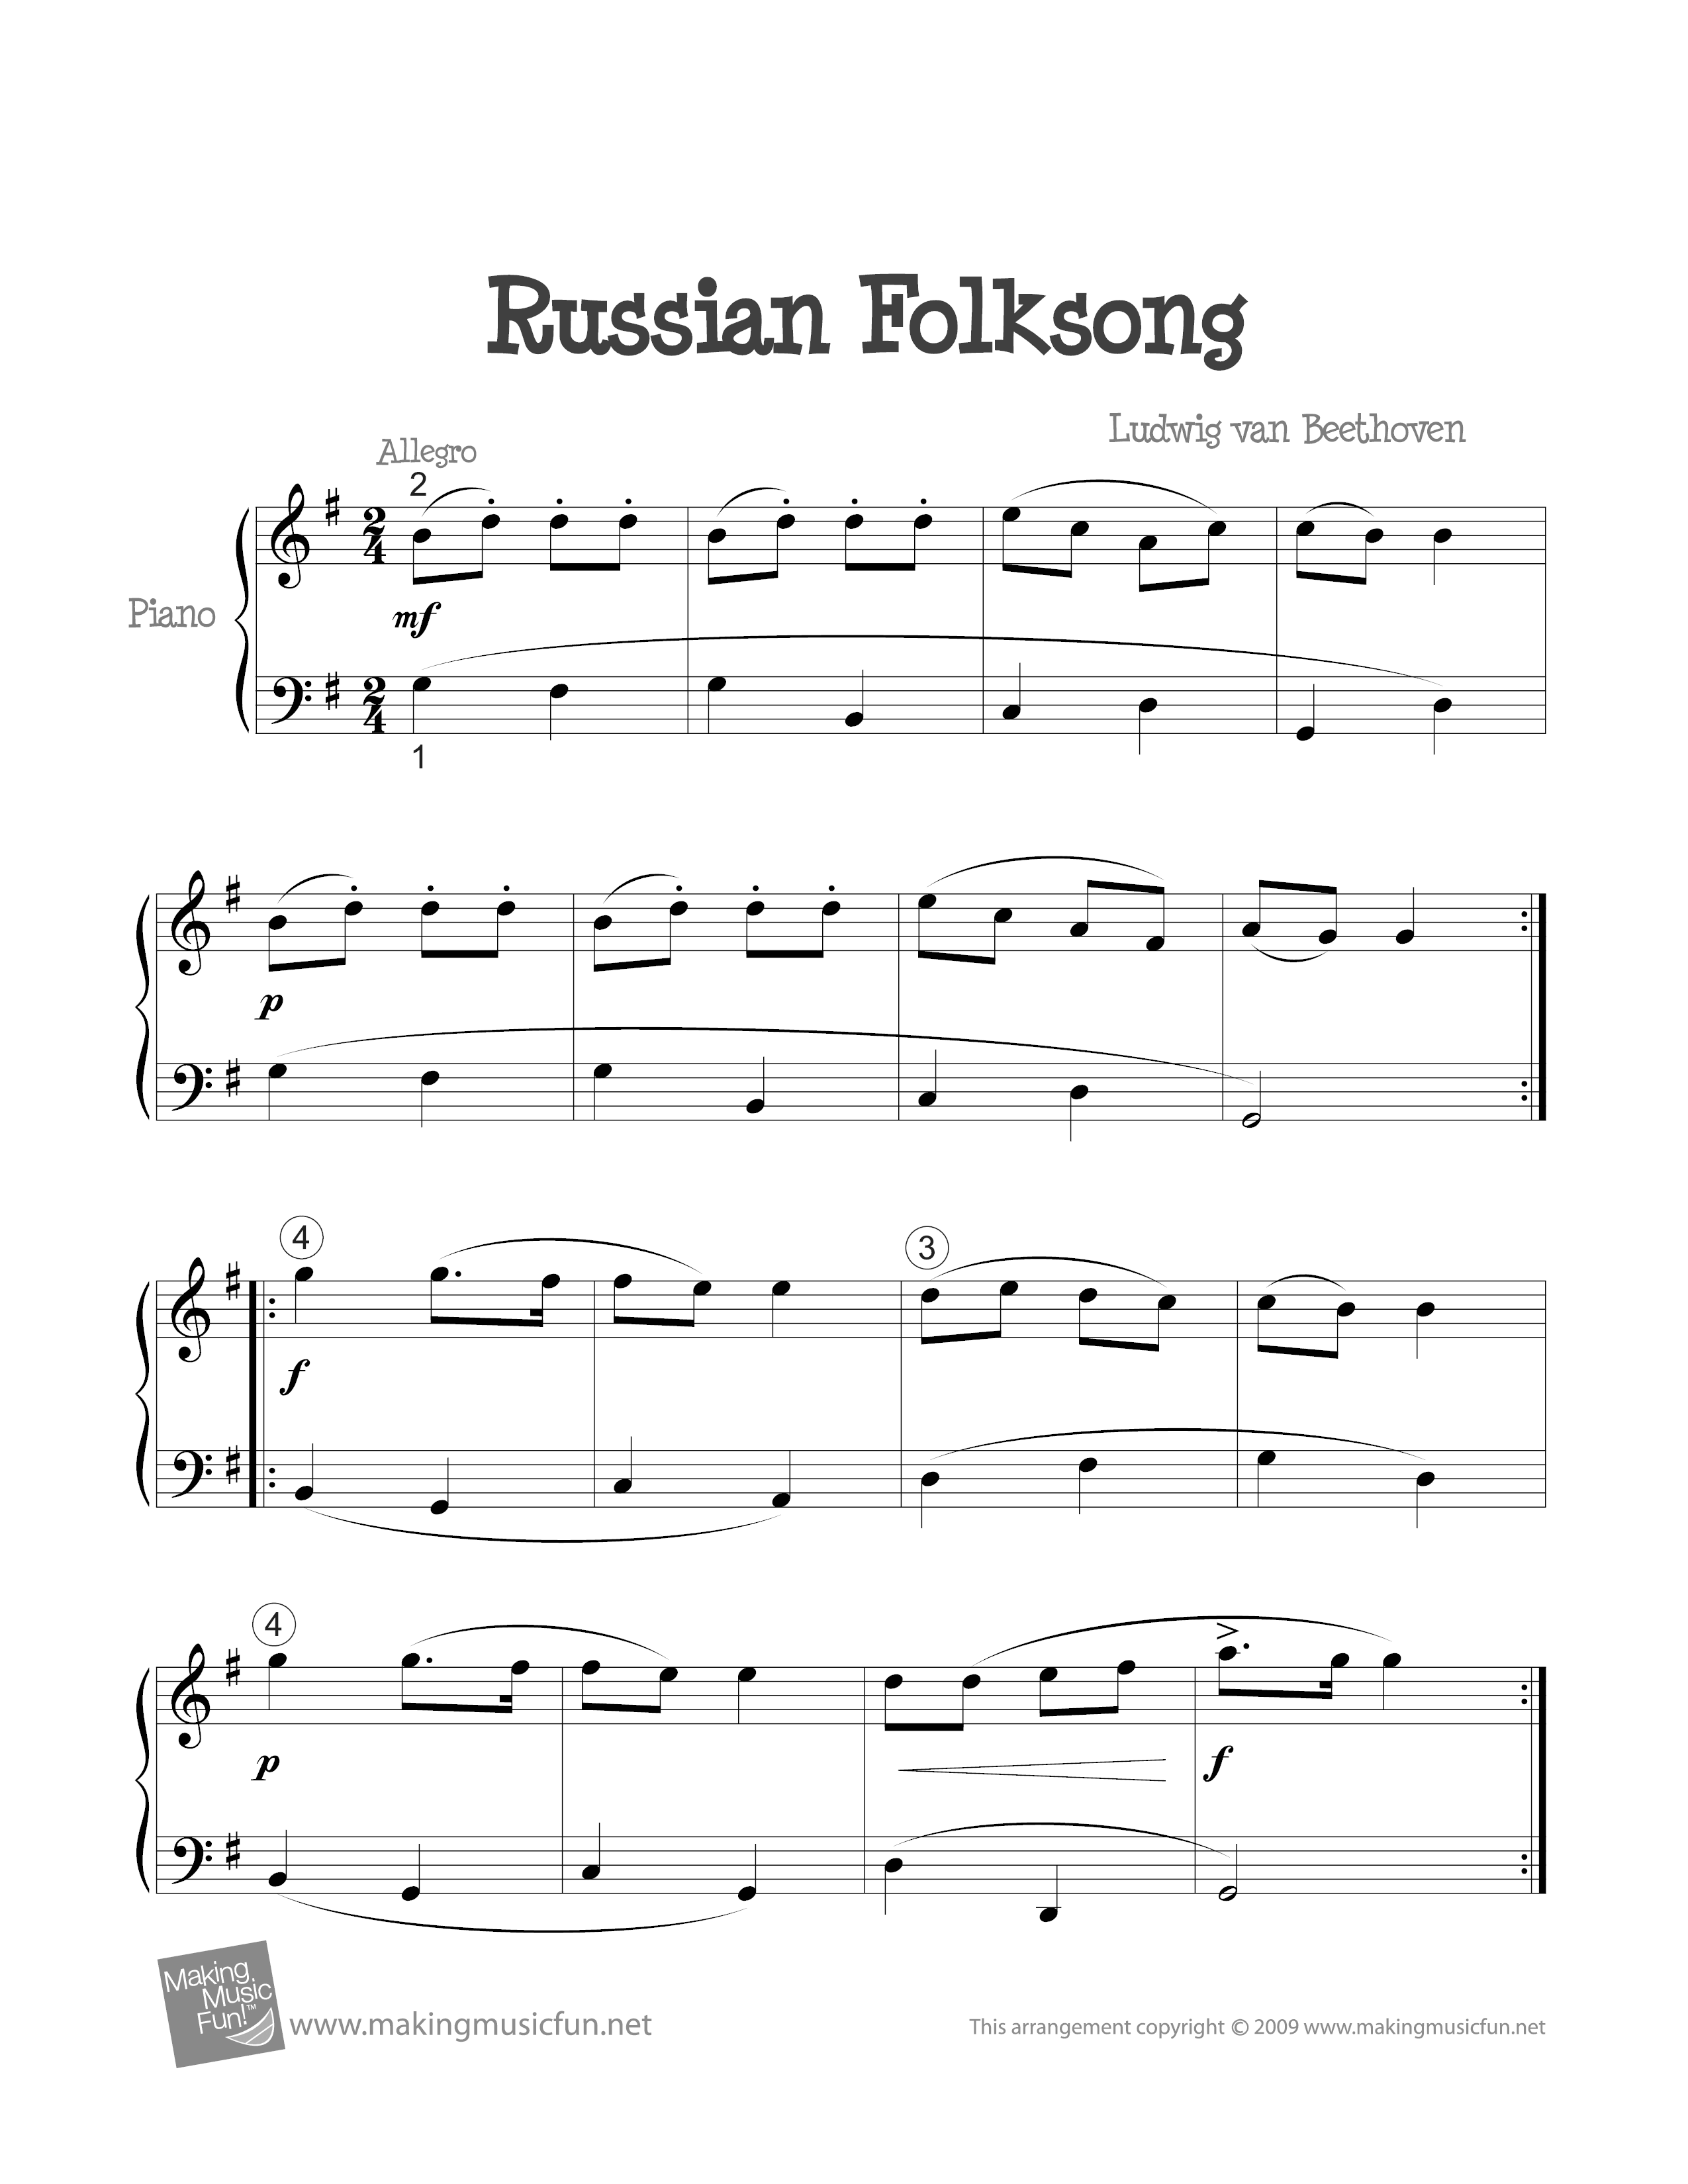 Russian Folksongピアノ譜